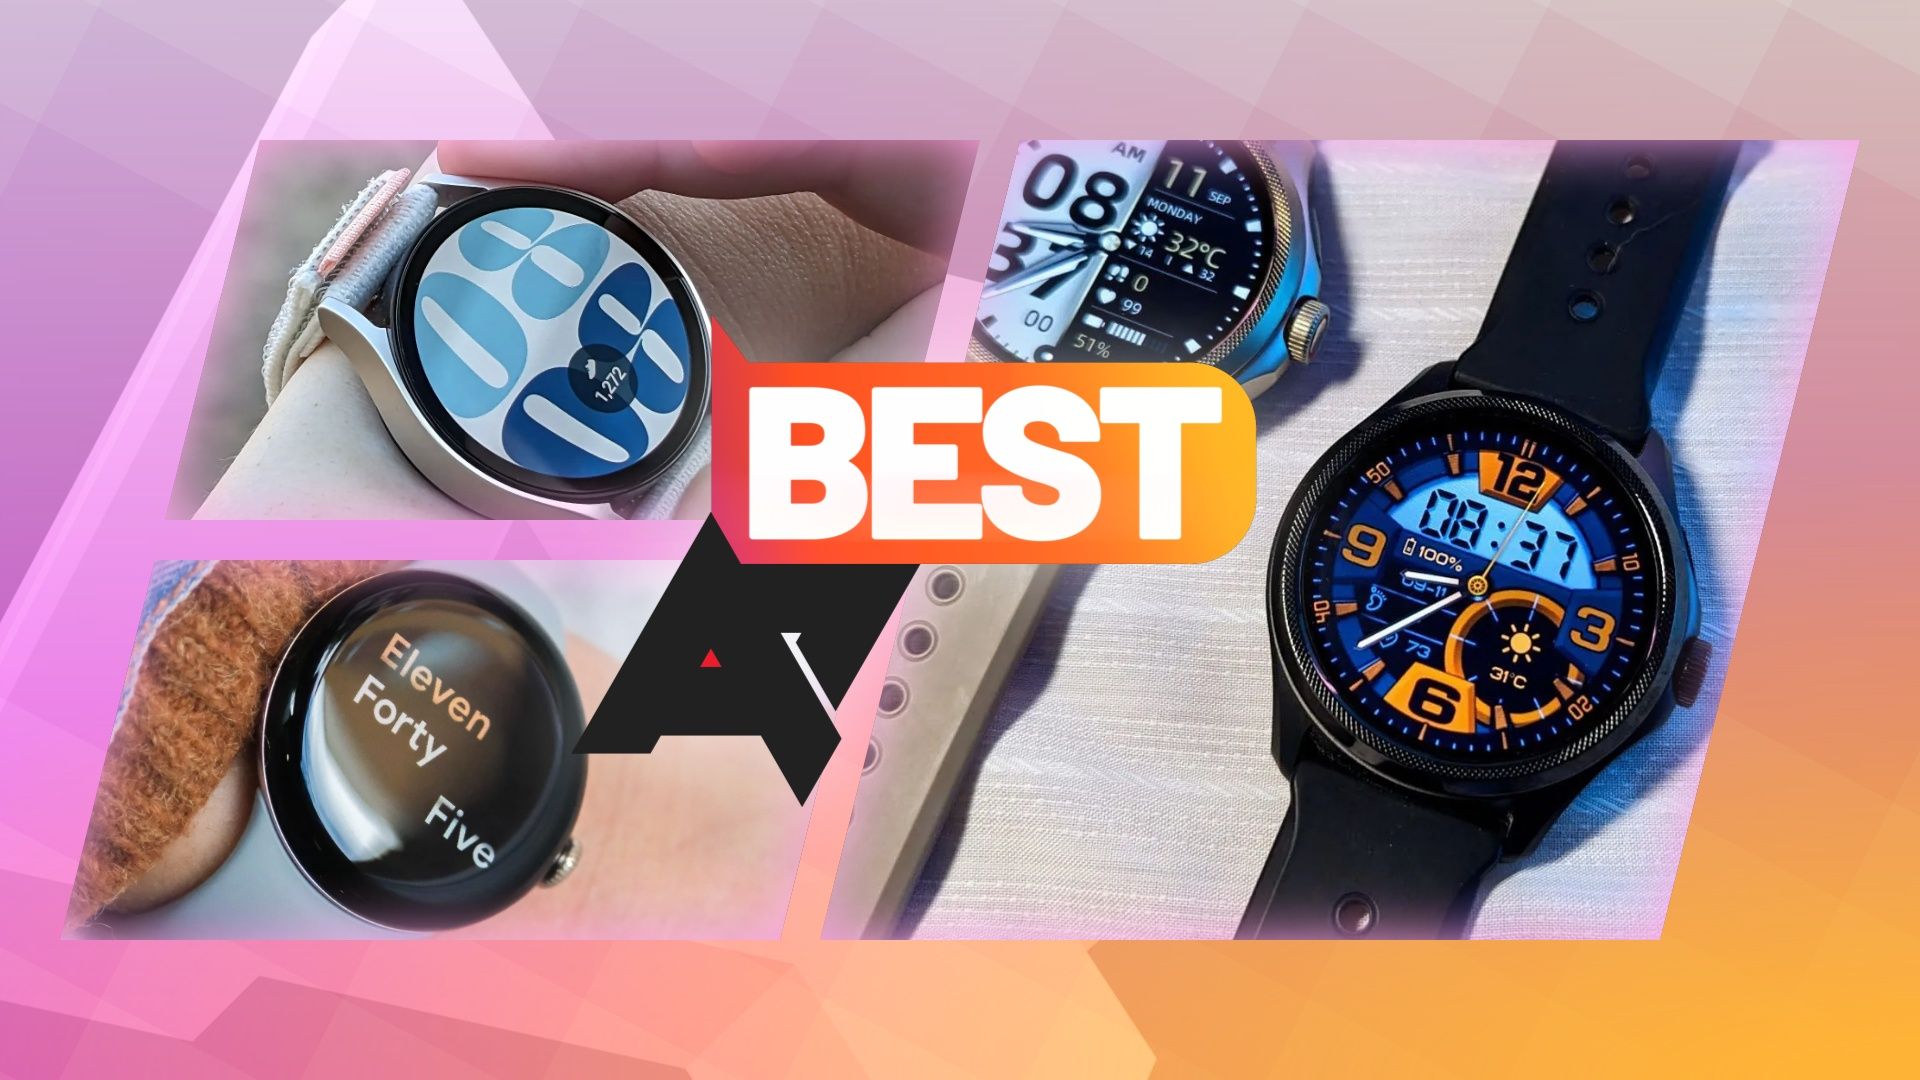 16 Best Wear OS Apps for Your New Android Watch - TechWiser